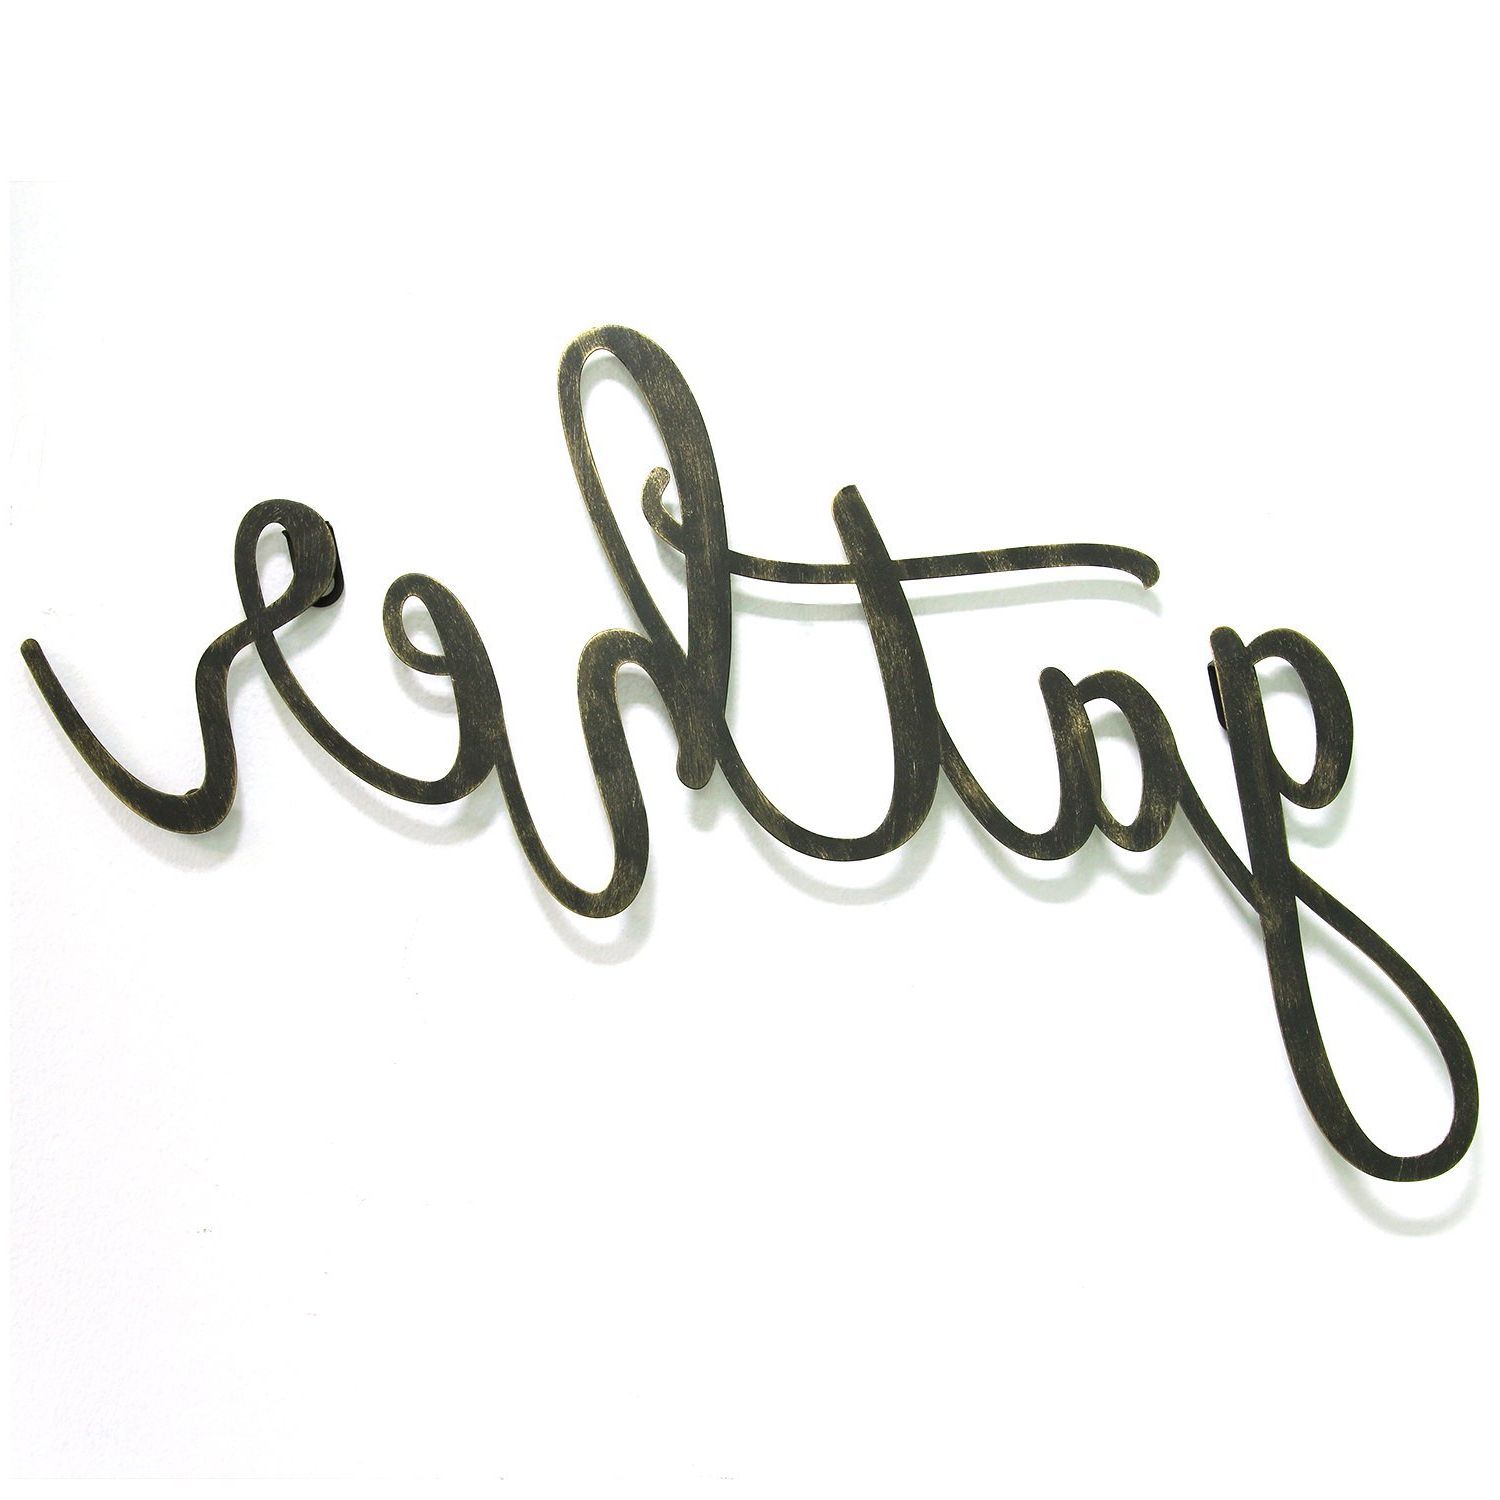 Newest Grey "eat" Sign With Rebar Decor Pertaining To Gather Script Wall Décor & Reviews (View 12 of 20)